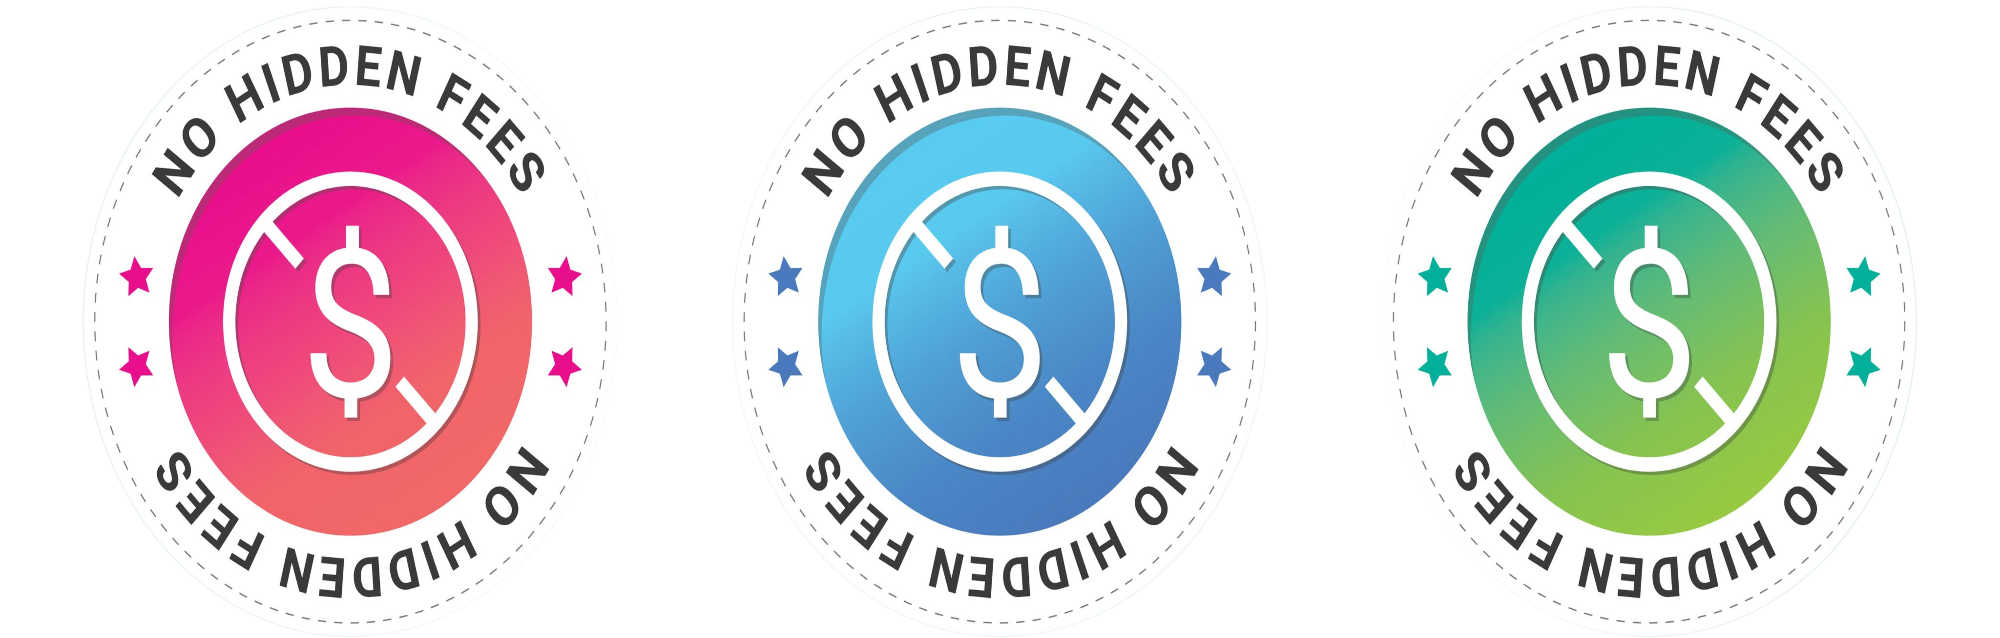 image of rs merchant services international has no hidden fees